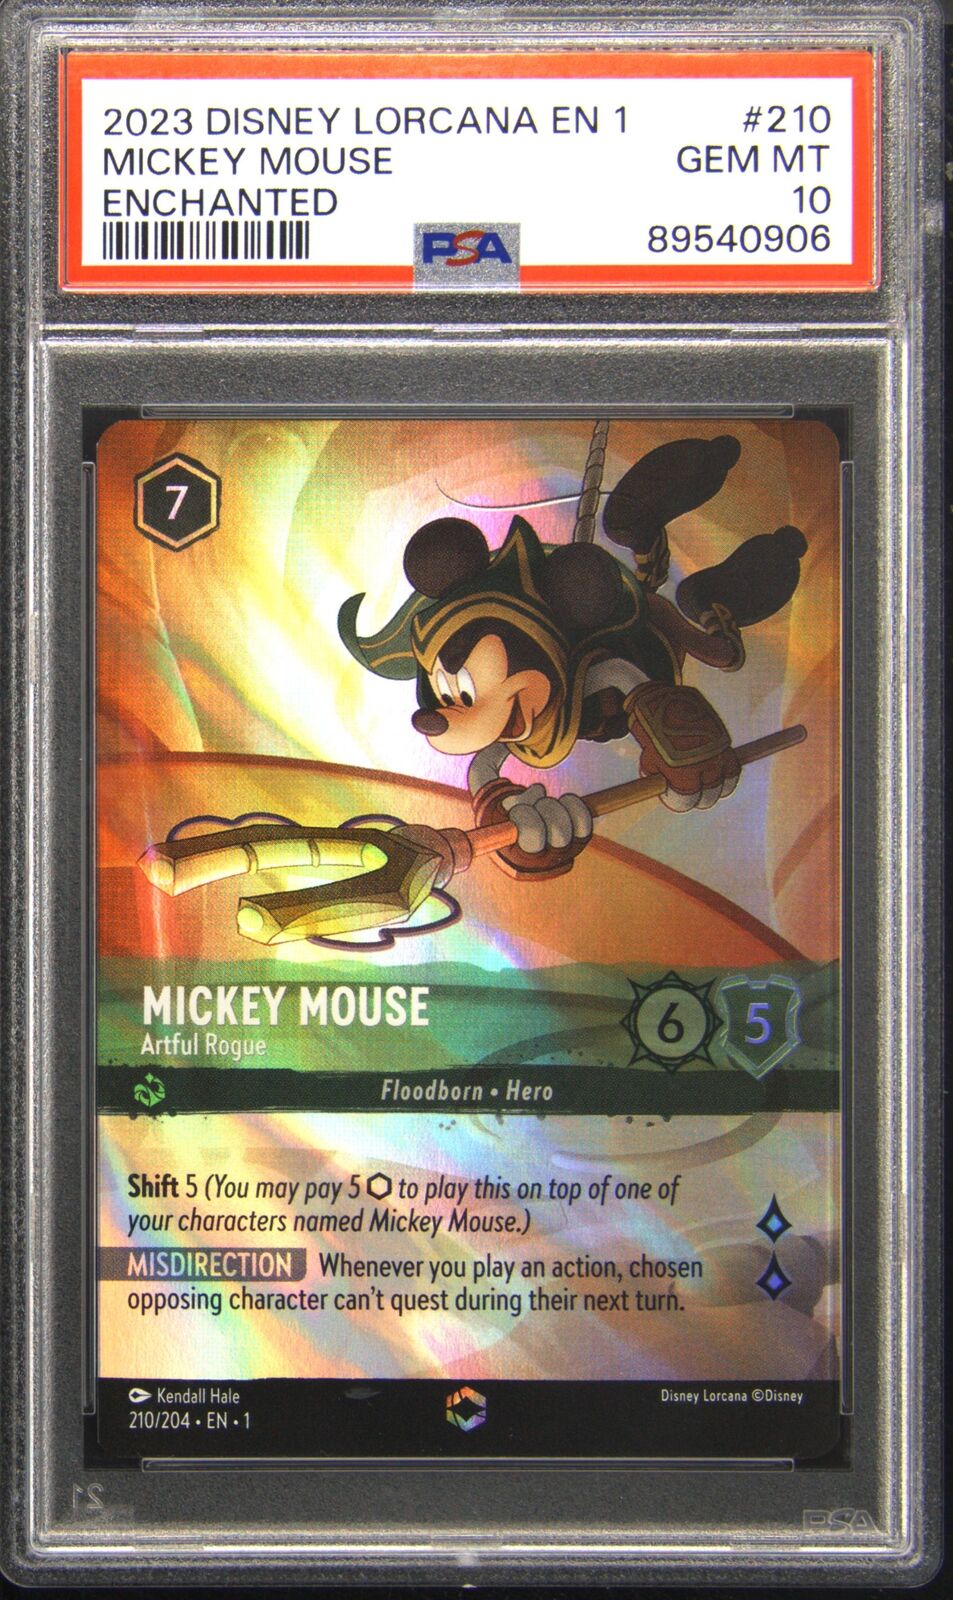 2023 Disney Lorcana: The First Chapter 210 Mickey Mouse Foil Enchanted PSA 10